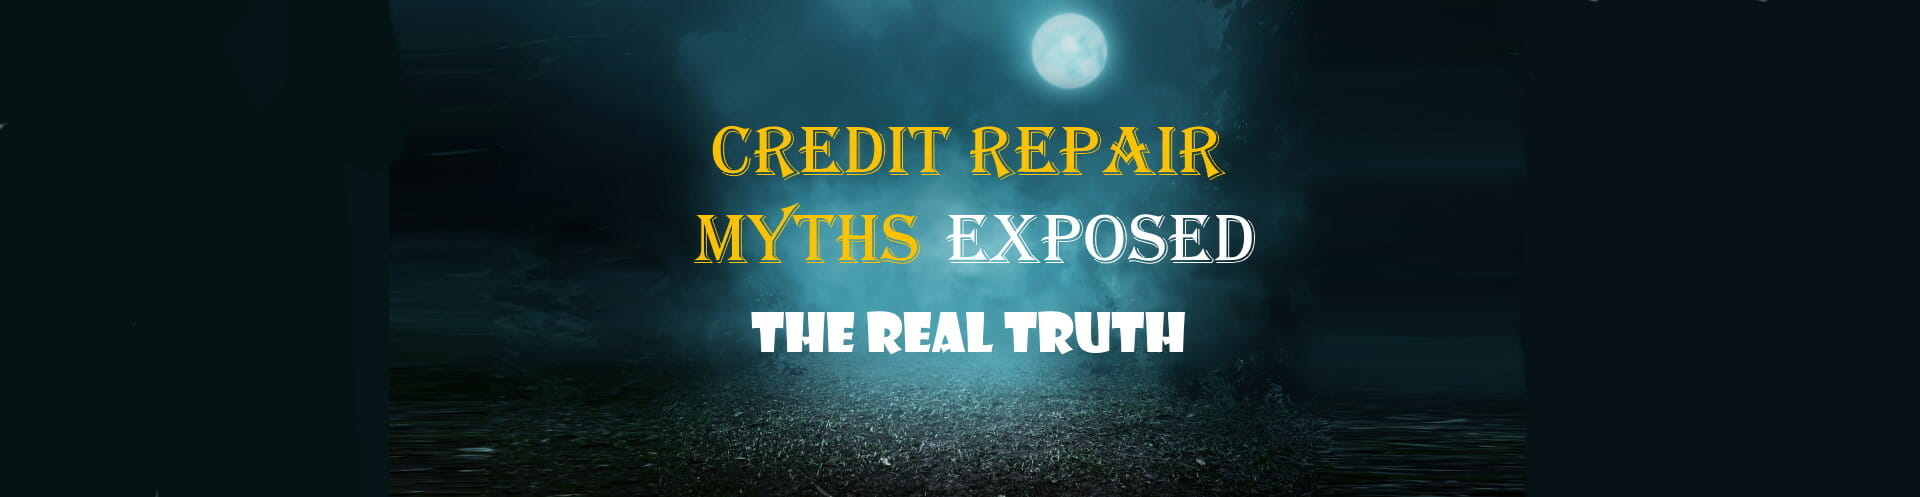 The real truth about credit repair misconceptions